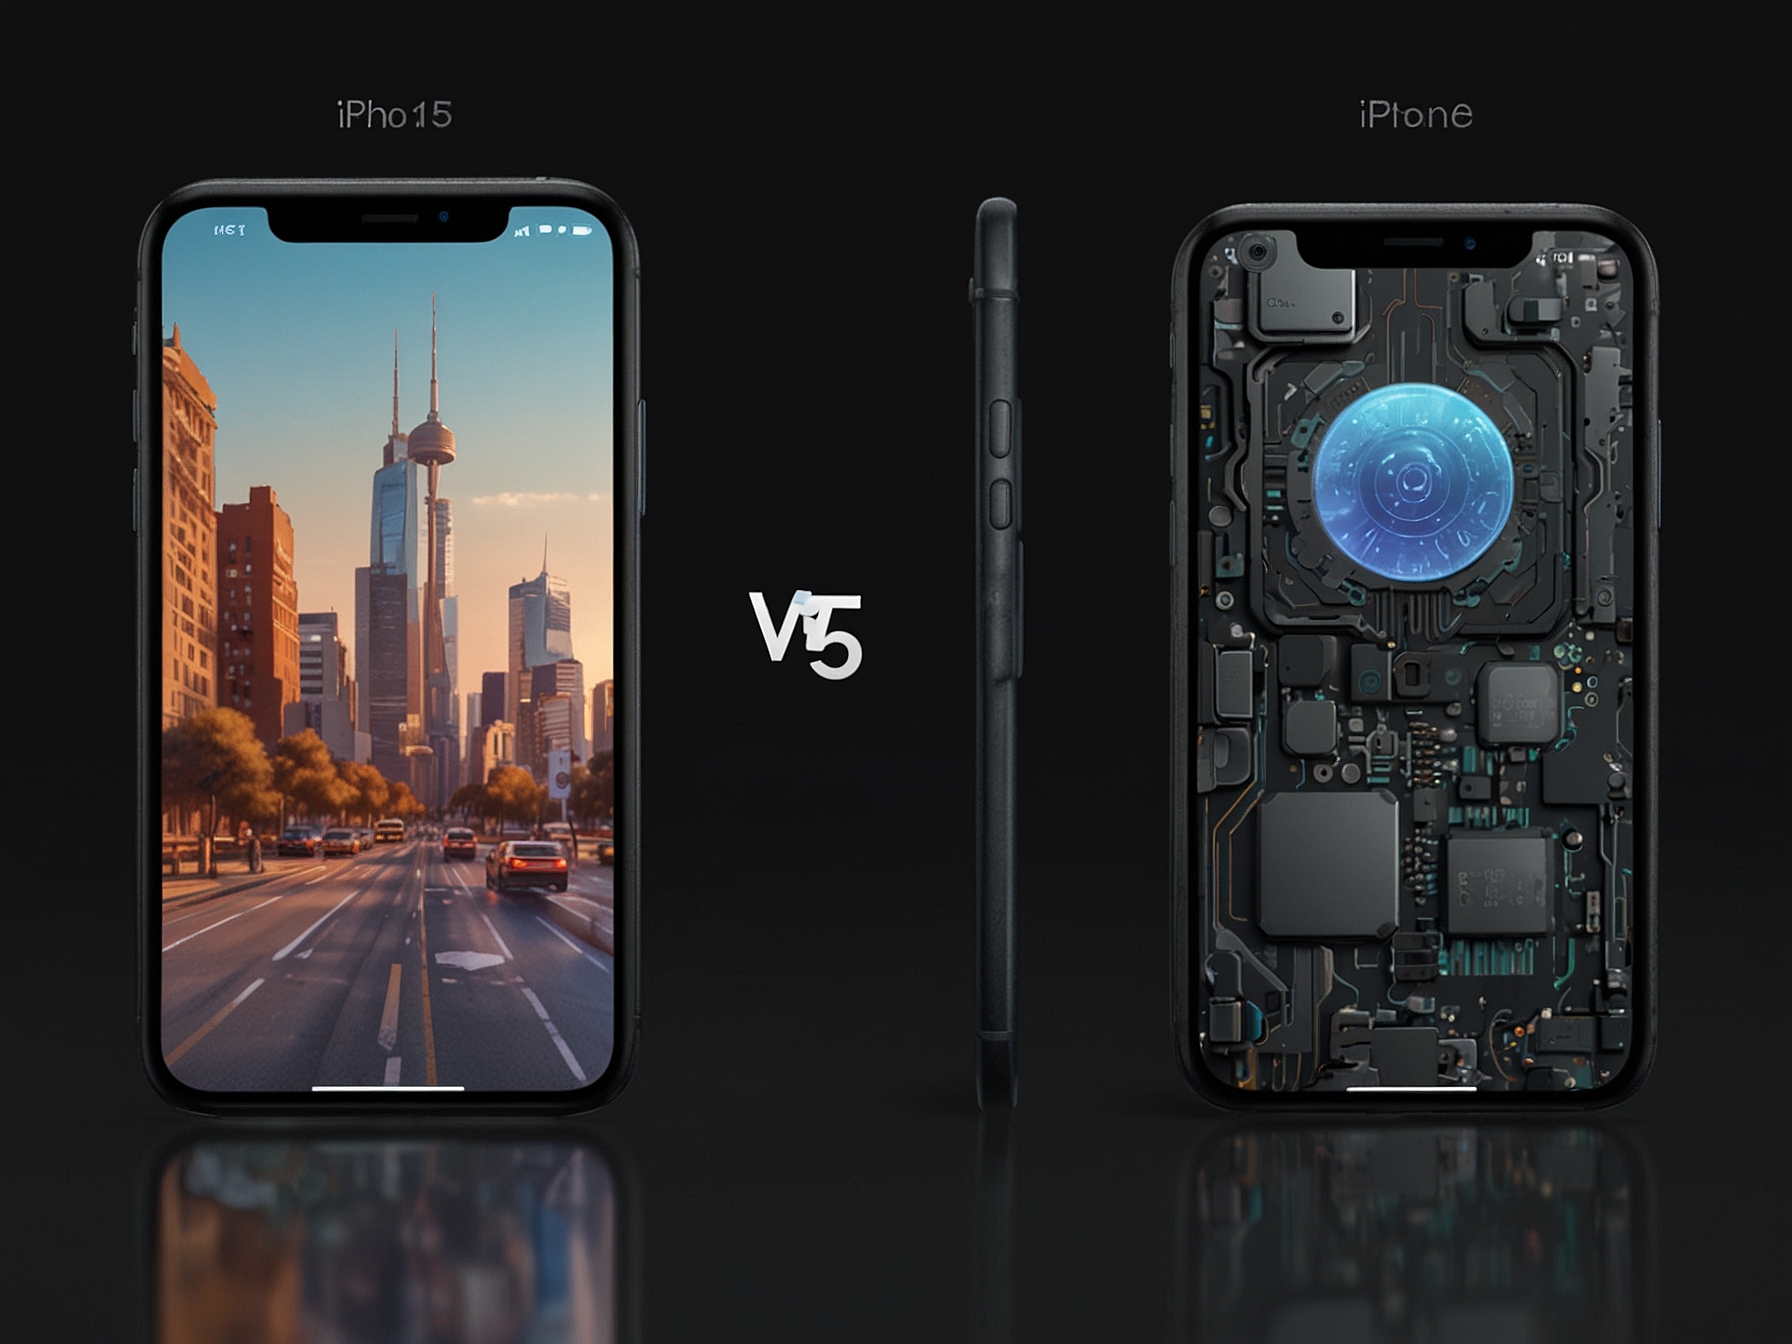 A visual comparison of the iPhone 15 and 16, focusing on AI integration, showcasing new hardware and software features while highlighting potential concerns like privacy and cost.